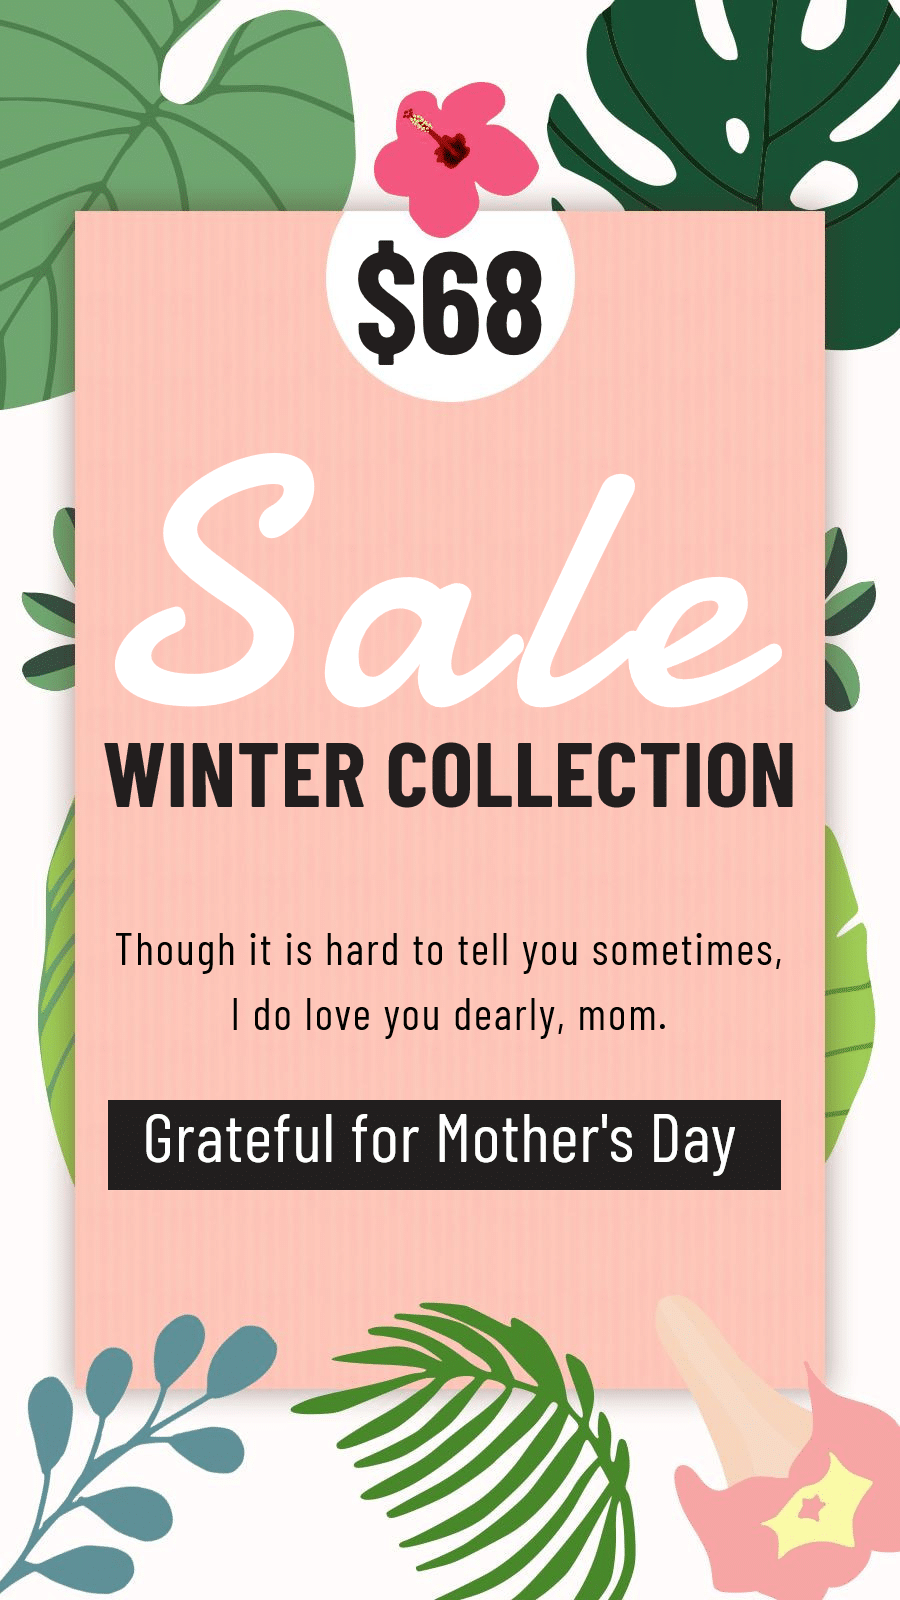 Simple Literary Mother's Day Winter Collection Promo Instagram Story预览效果